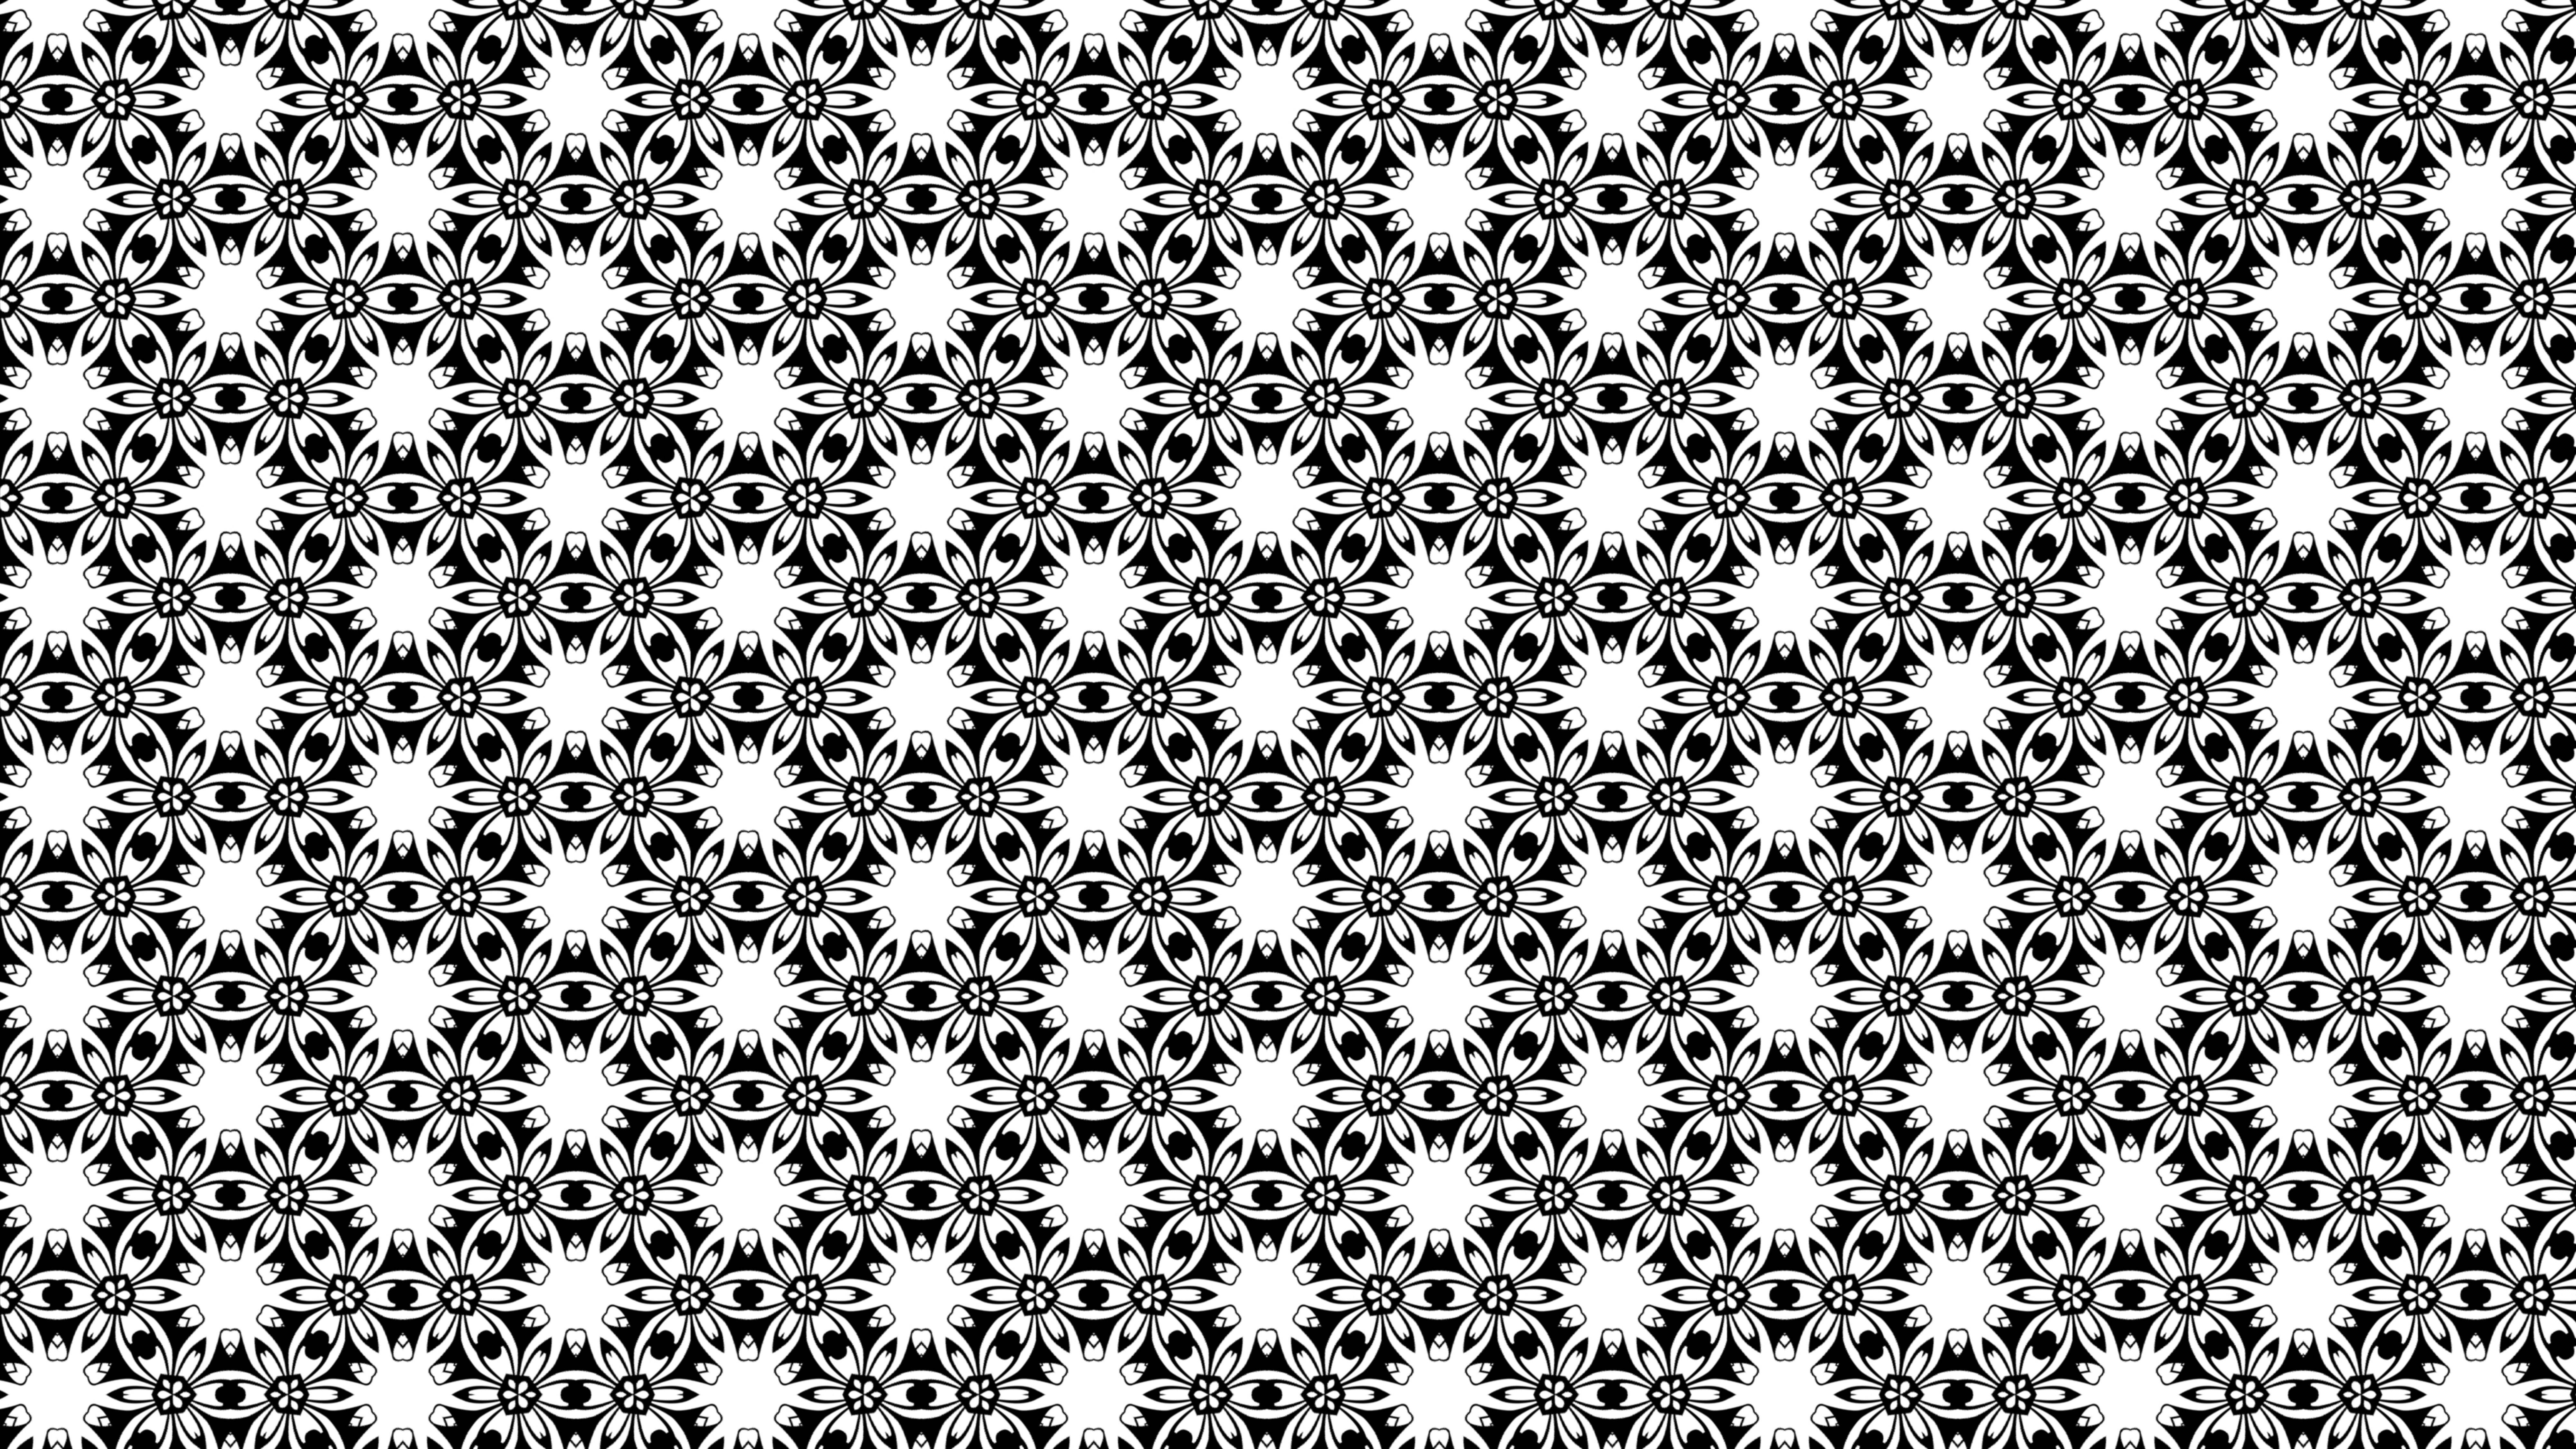 Free Black and White Floral Seamless Pattern Background Design